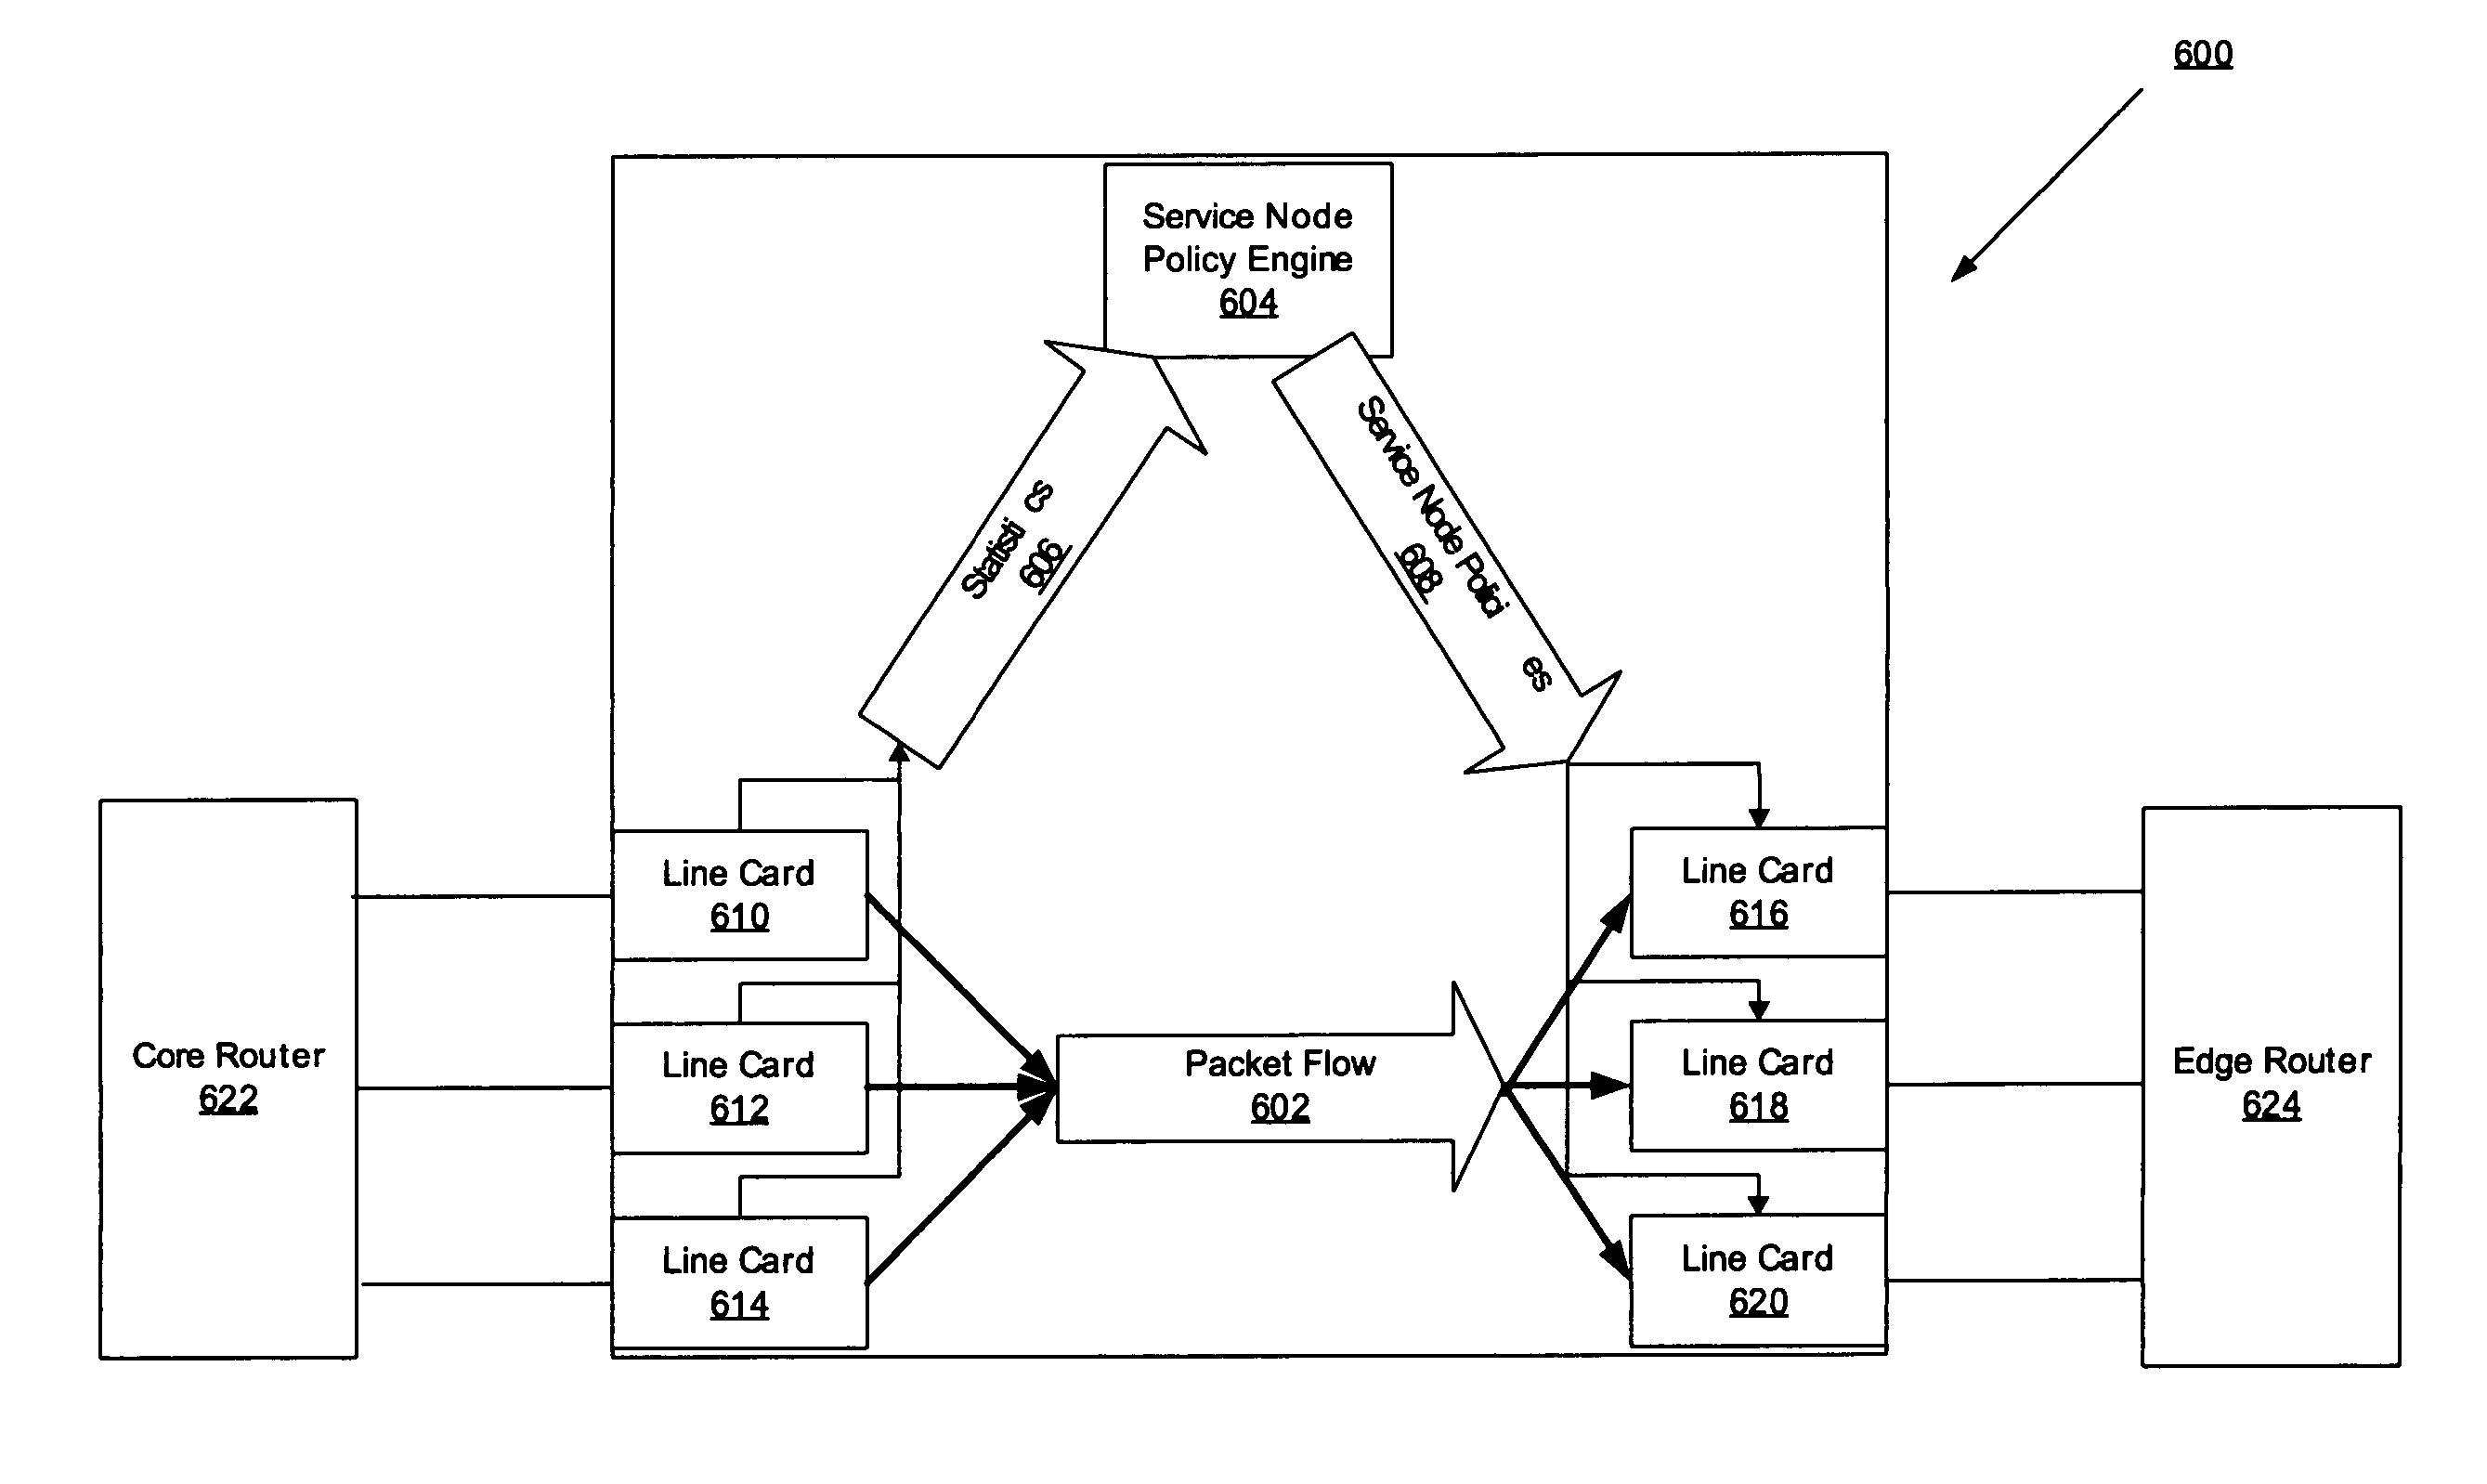 Network element architecture for deep packet inspection